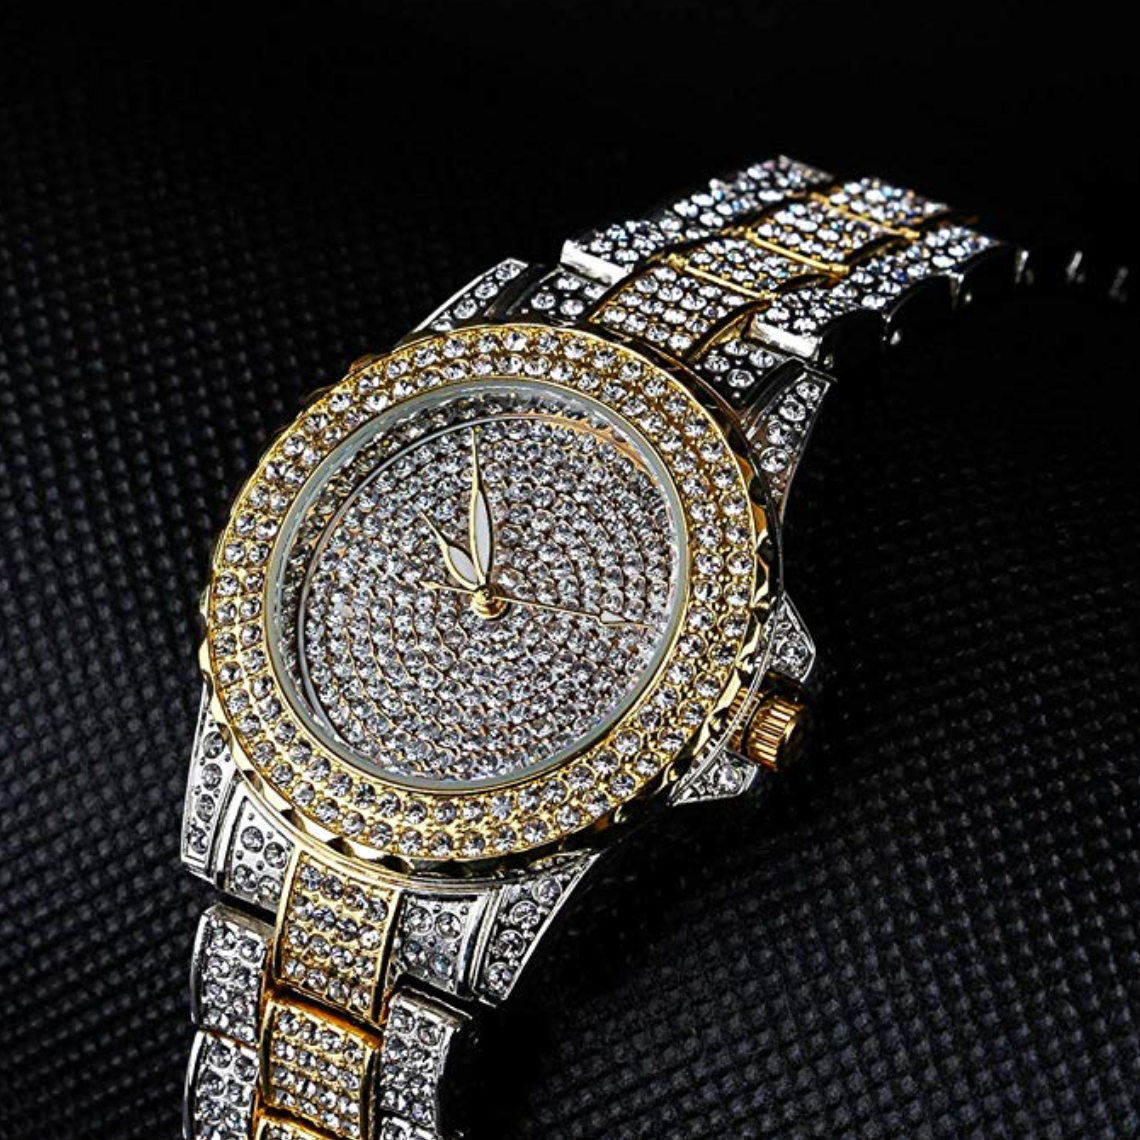 2-Tone Gold Silver Color Watch Simulated Diamond Watch Bust Down Hip H ...